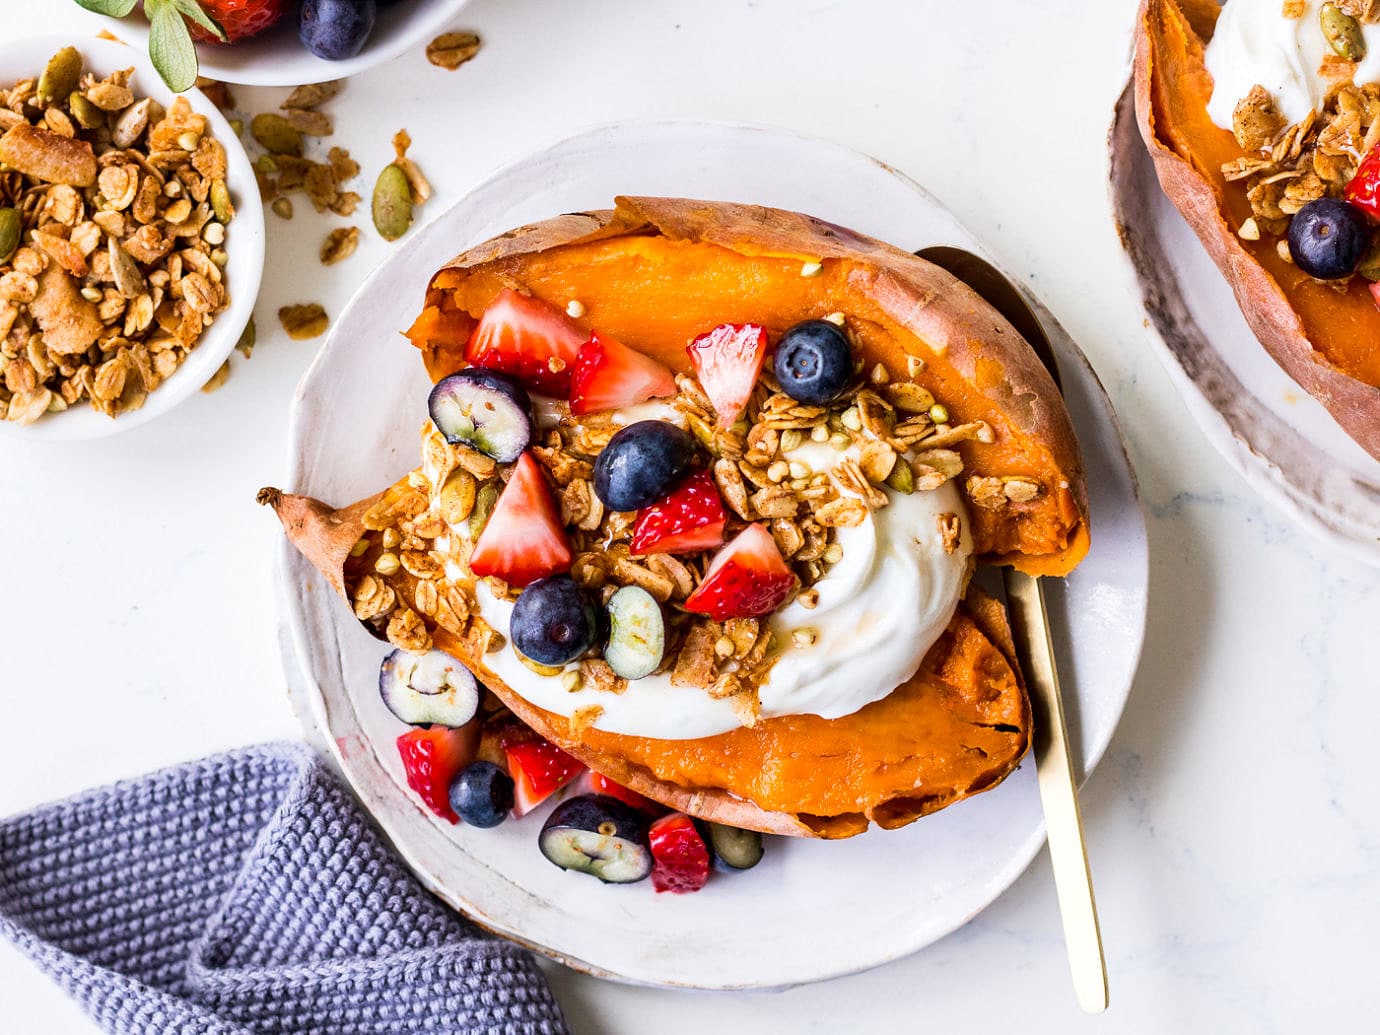 Small white plate with sweet potato topped with yoghurt, berries and granola